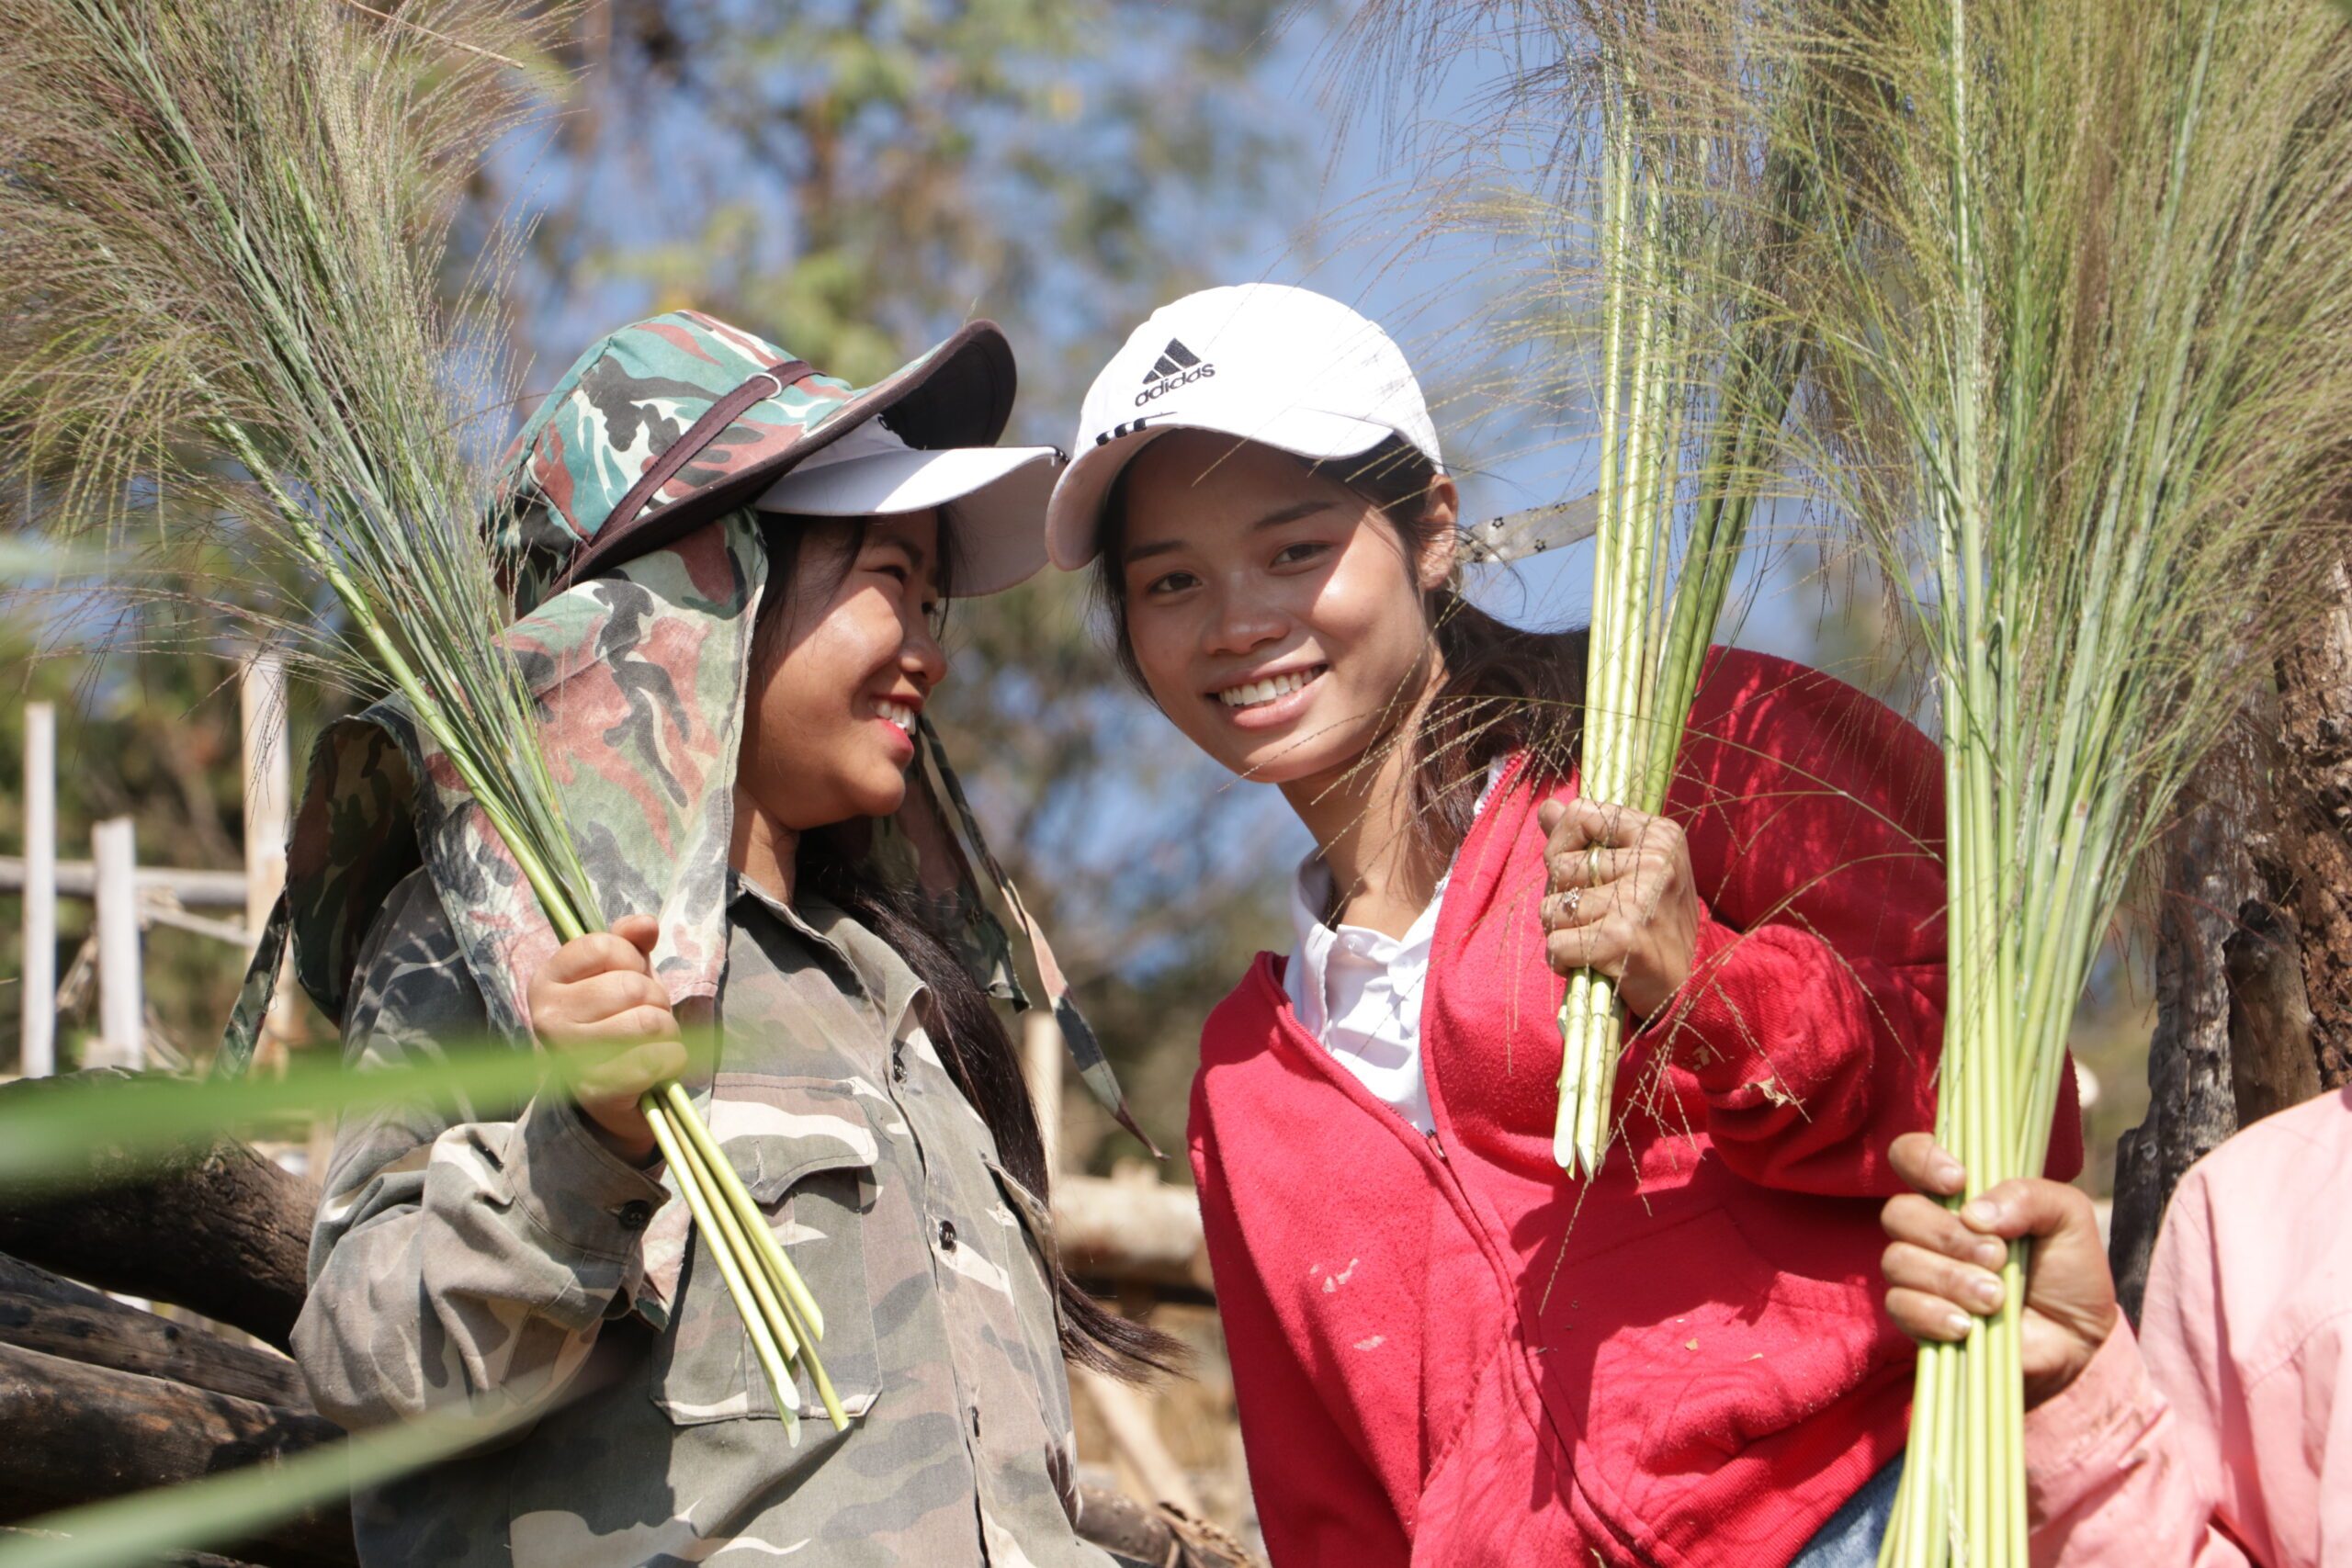 Two girls holding broom grass flowers.